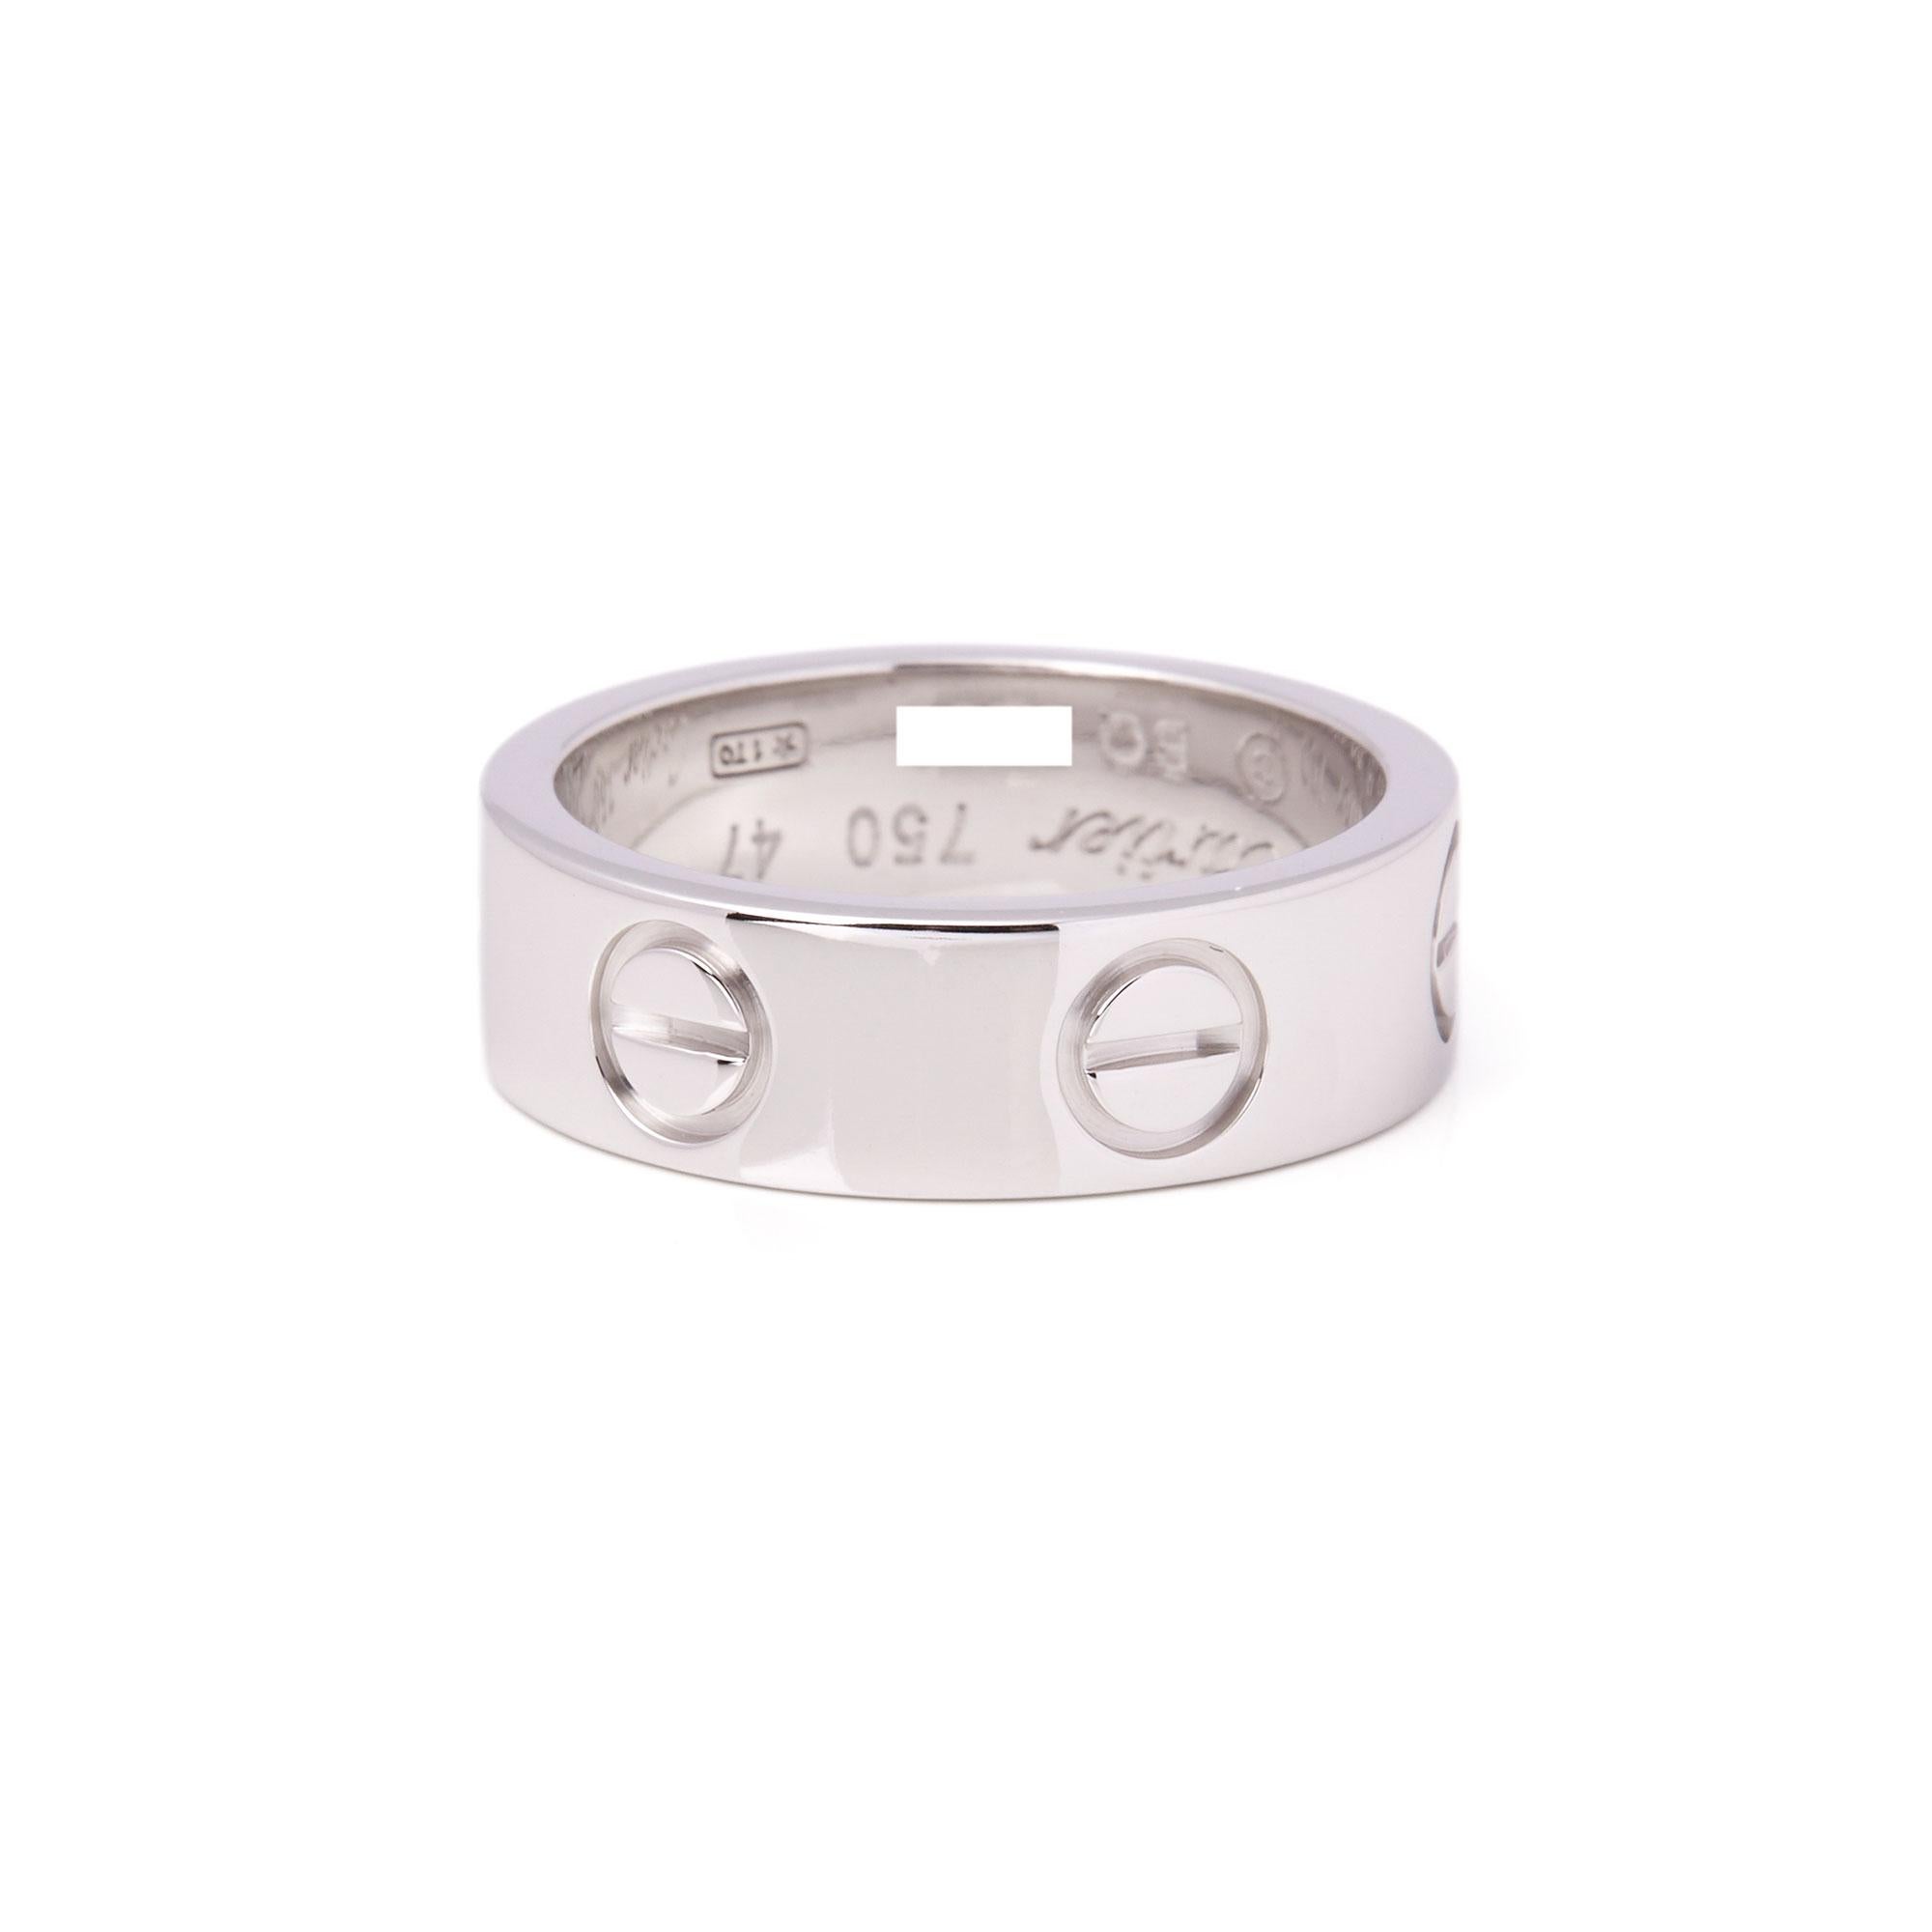 This ring by Cartier is from their Love collection and features their iconic screw detail set in 18ct white gold. Complete with Xupes presentation box. UK ring size H 1/2. EU ring size 47. US ring size 4. Our Xupes reference is COMJ480 should you